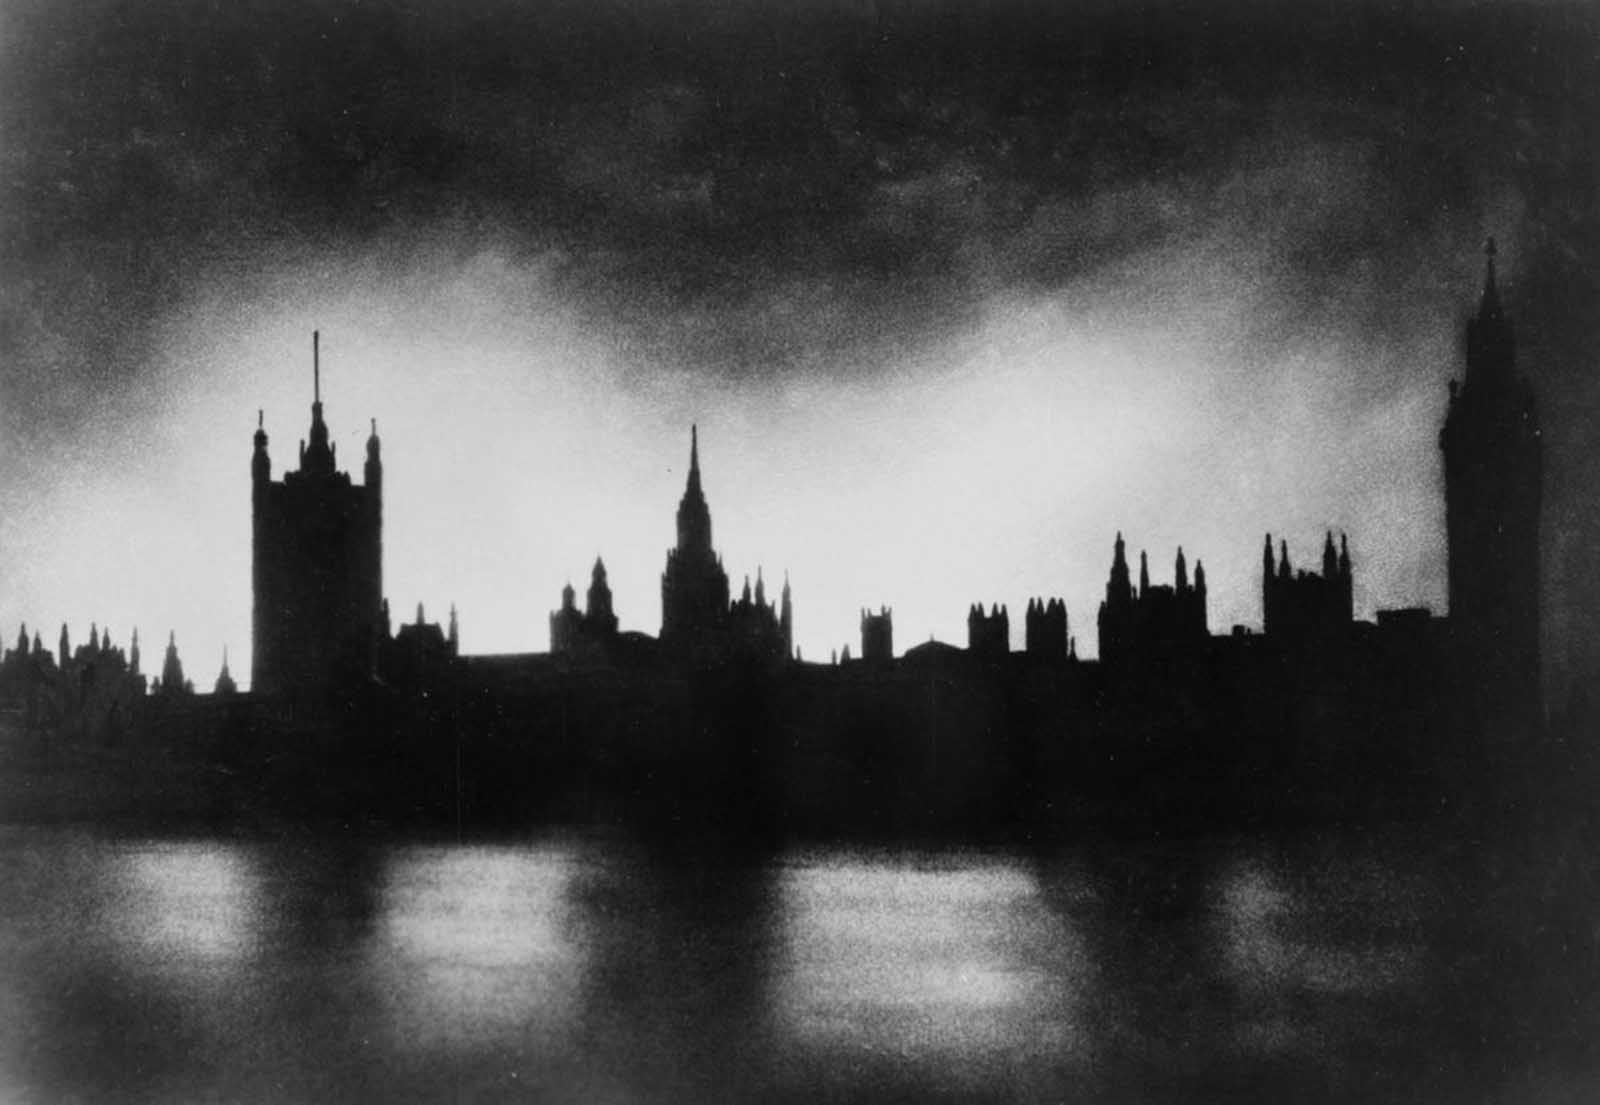 The Palace of Westminster in London, silhouetted against light from fires caused by bombings.